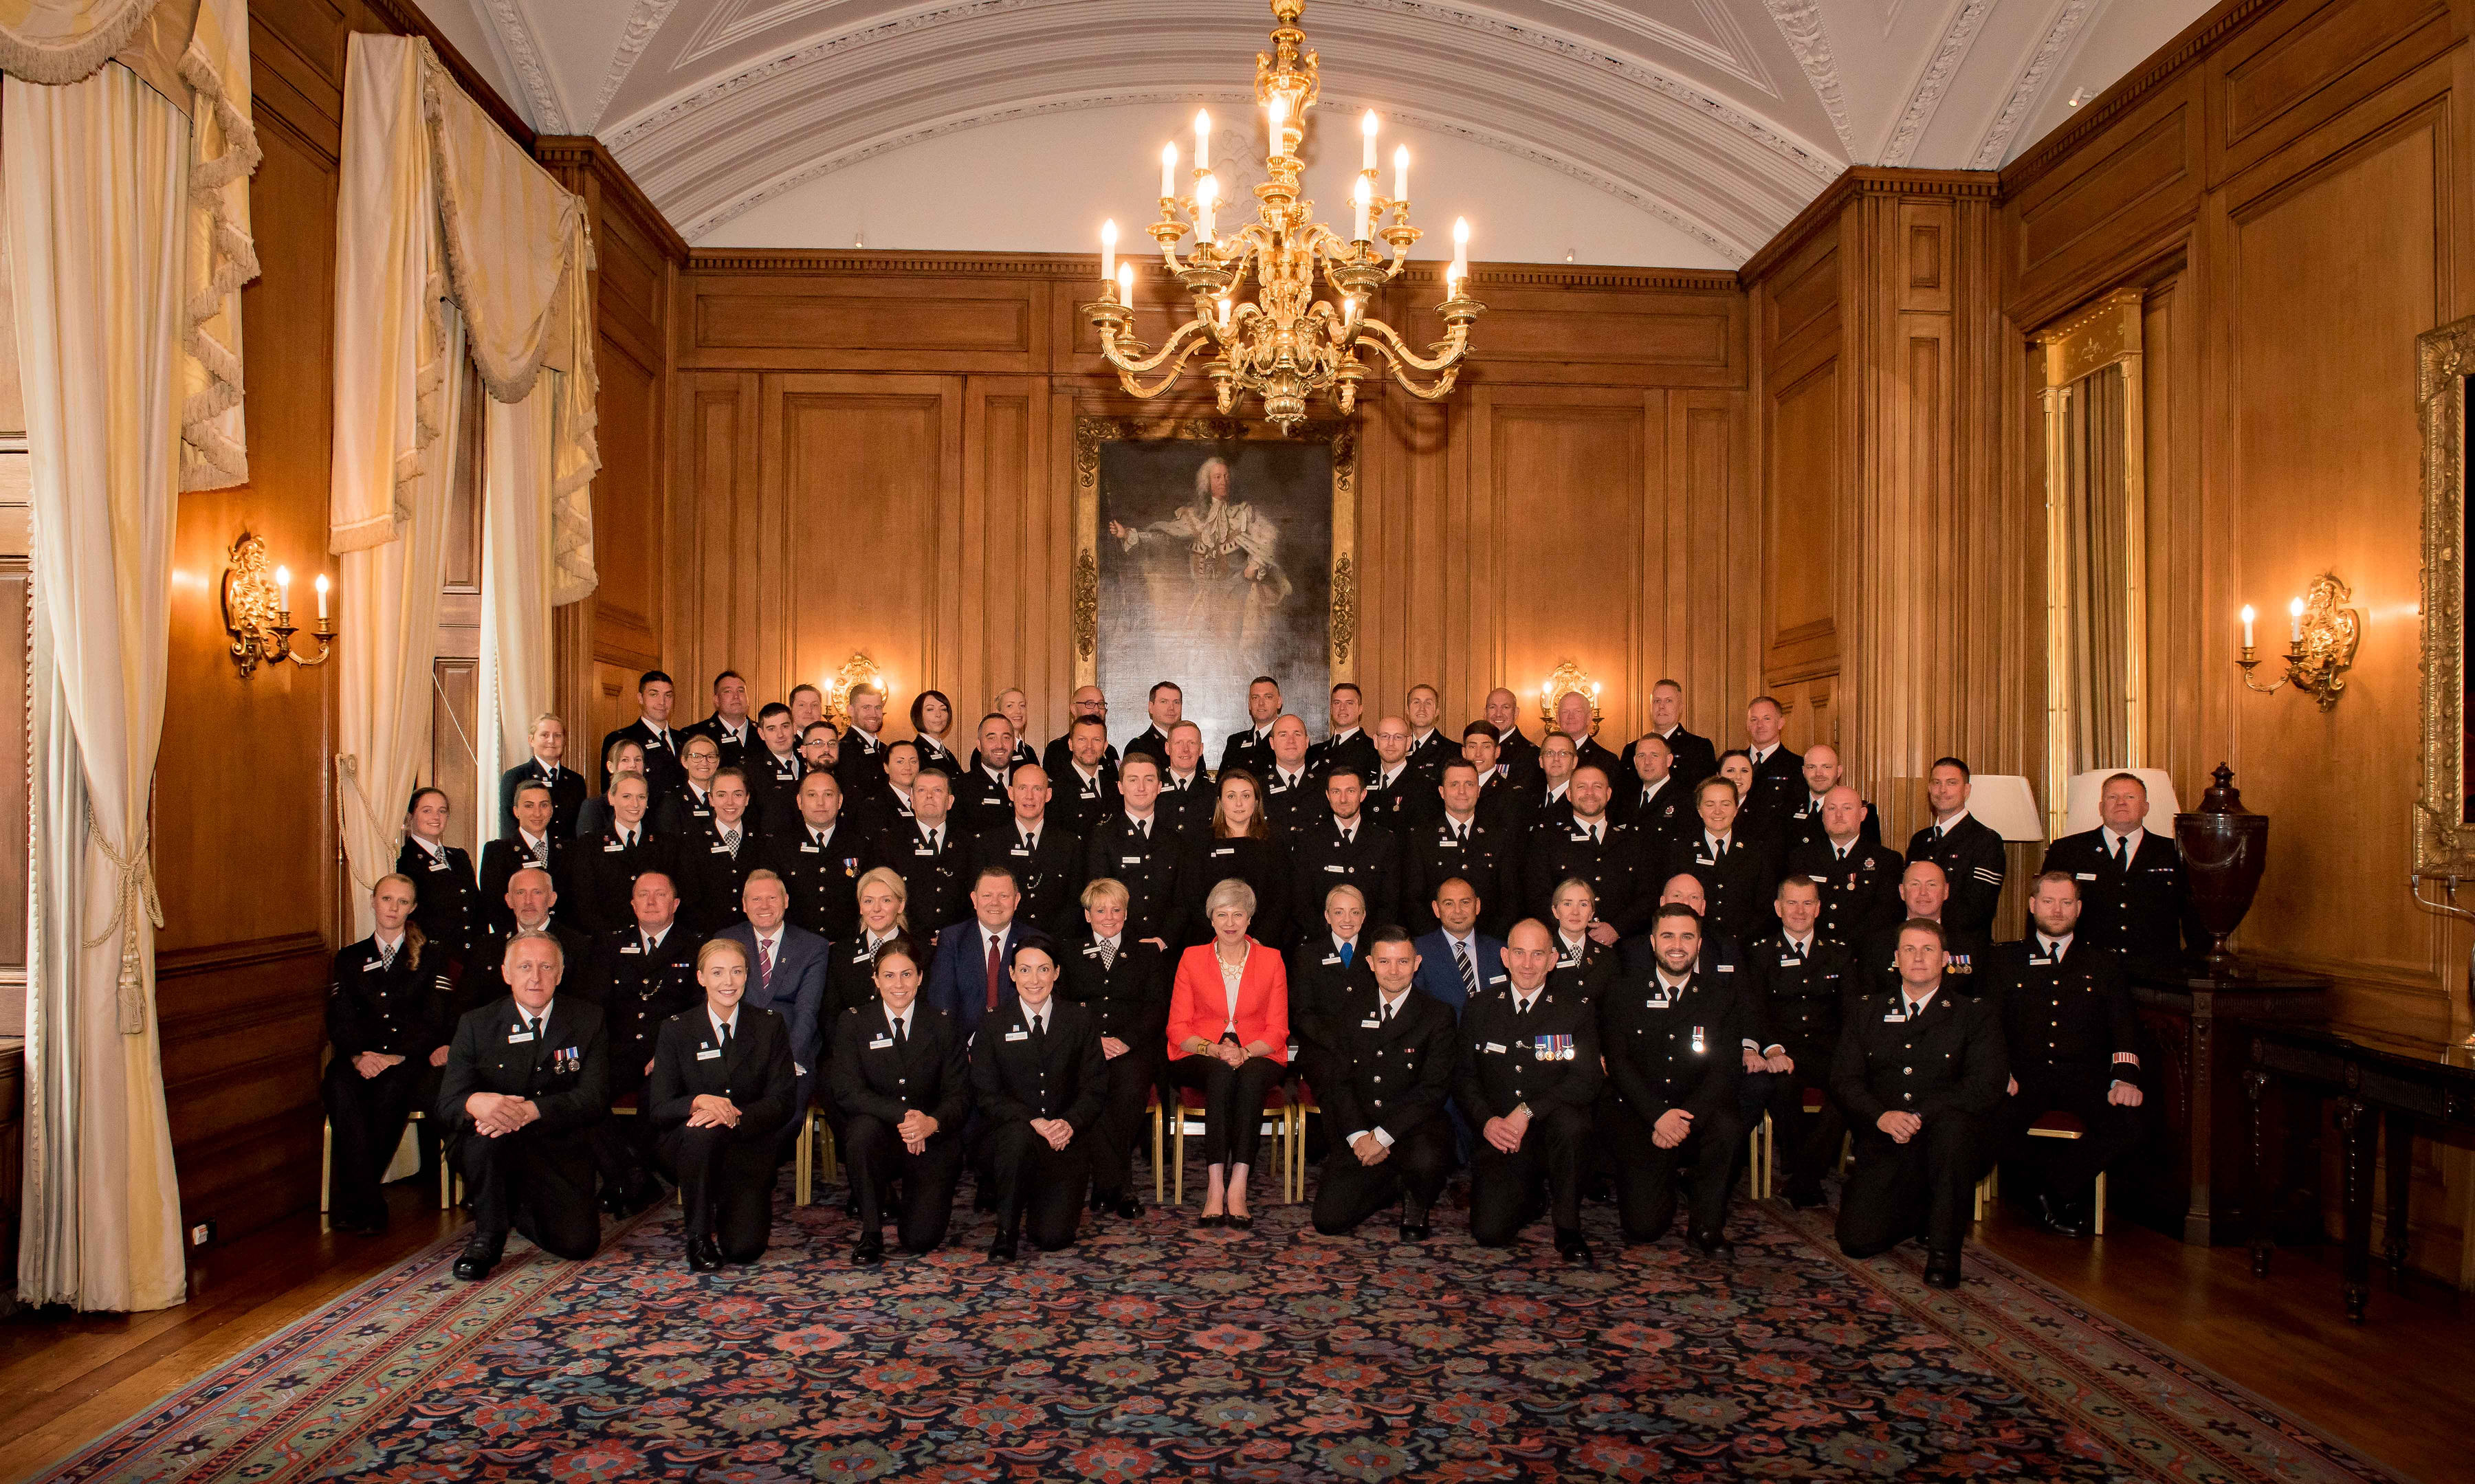 Police Bravery nominees at Downing Street with Prime Minister Theresa May